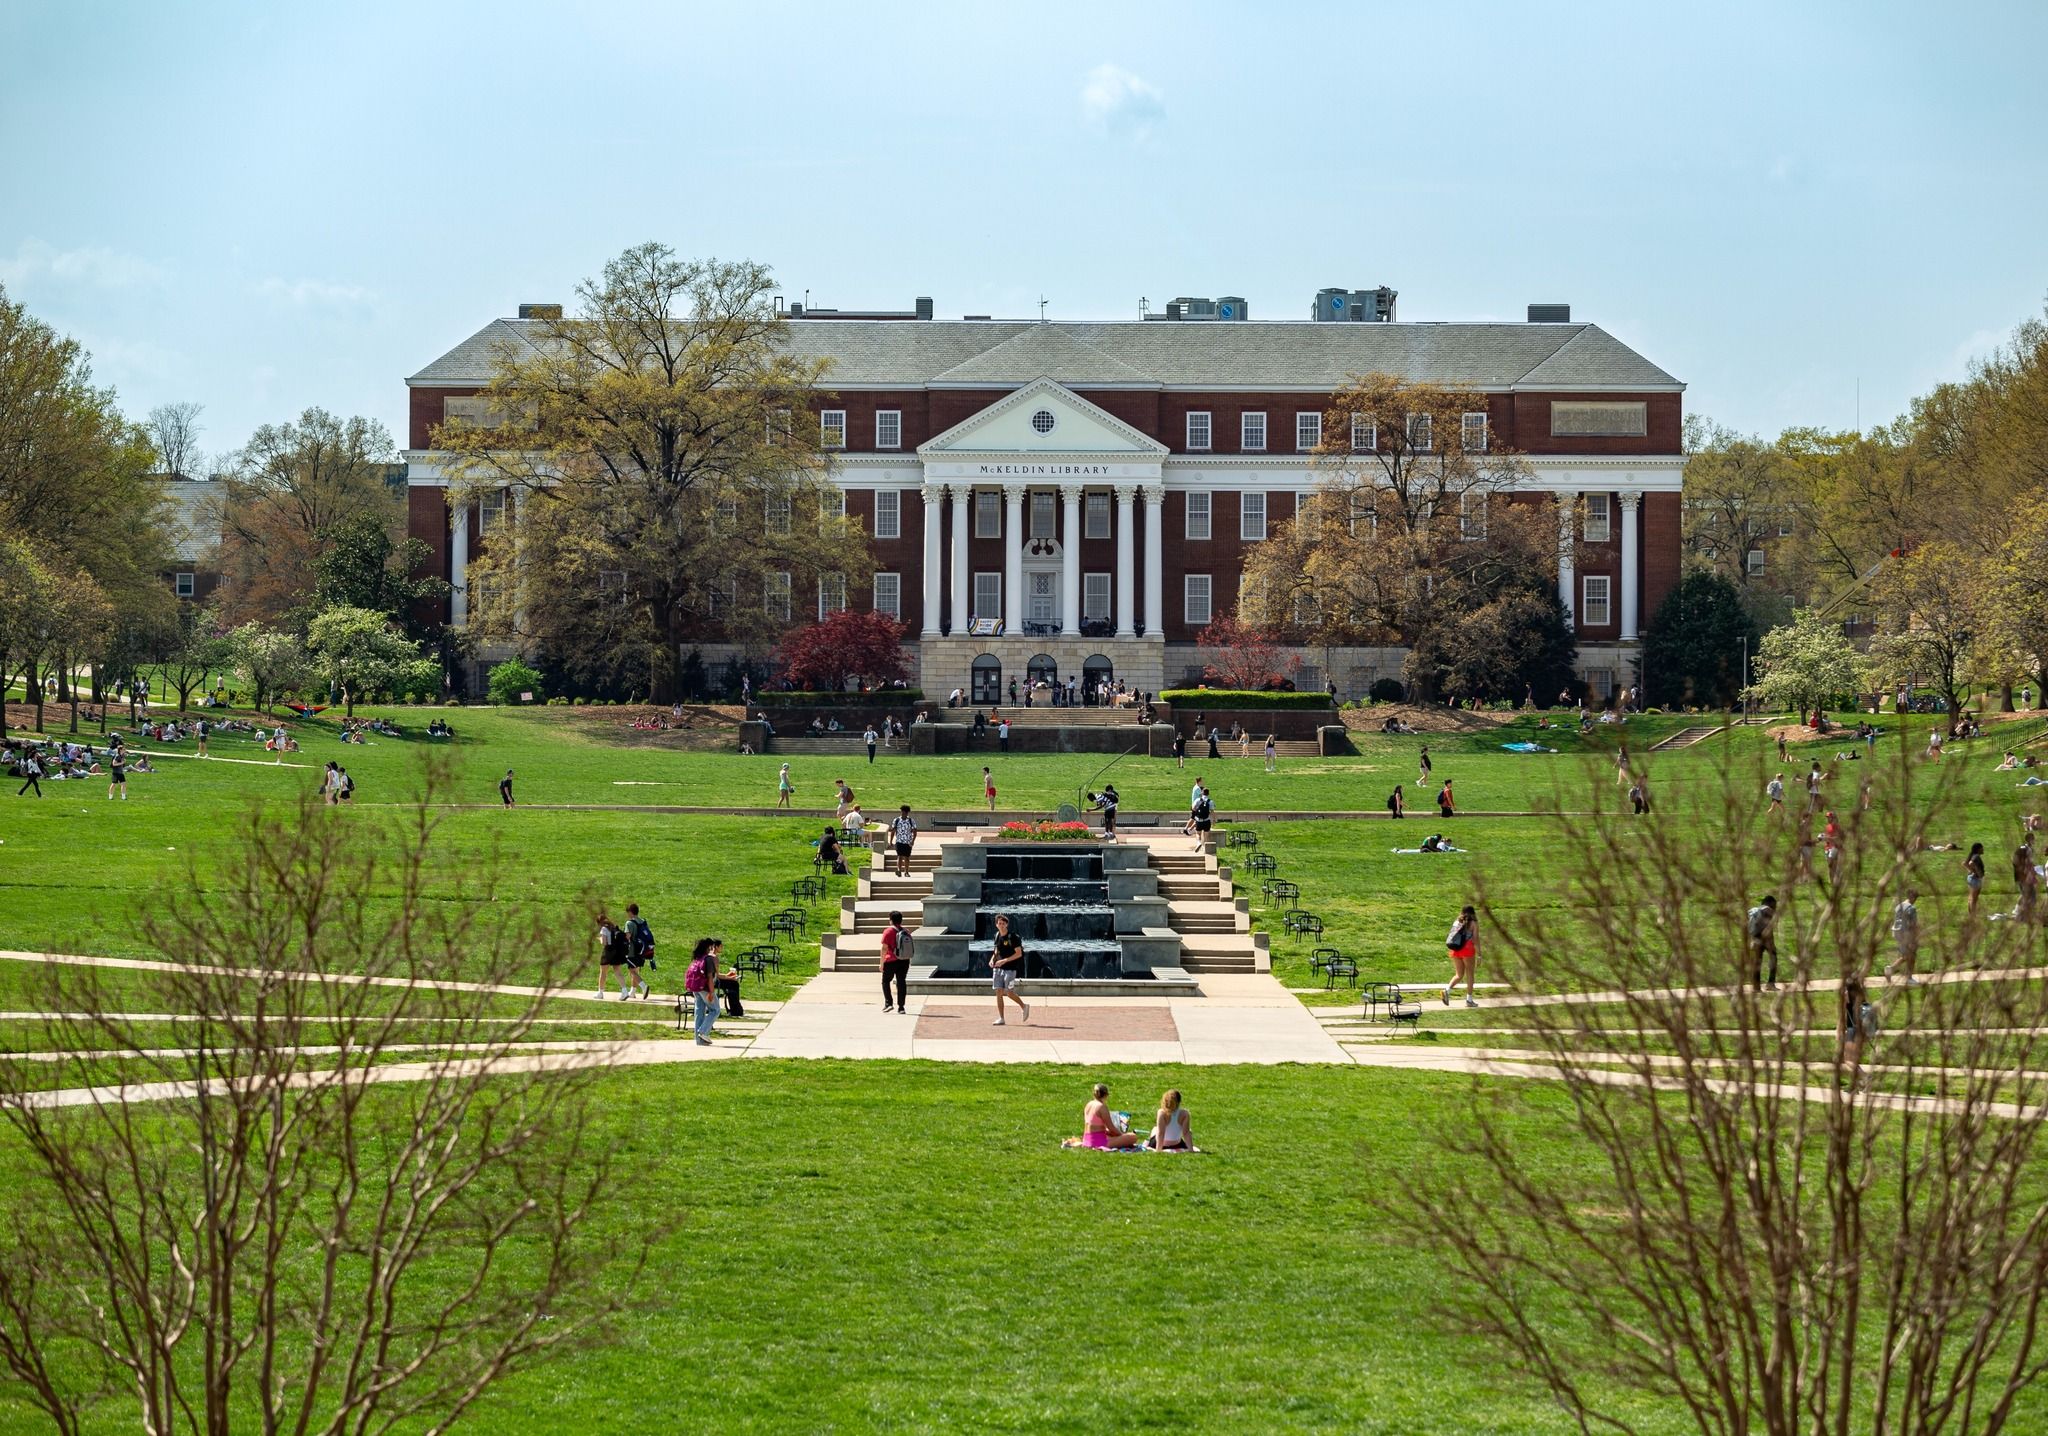 80+ Top University of Maryland, College Park Online Courses [2023]